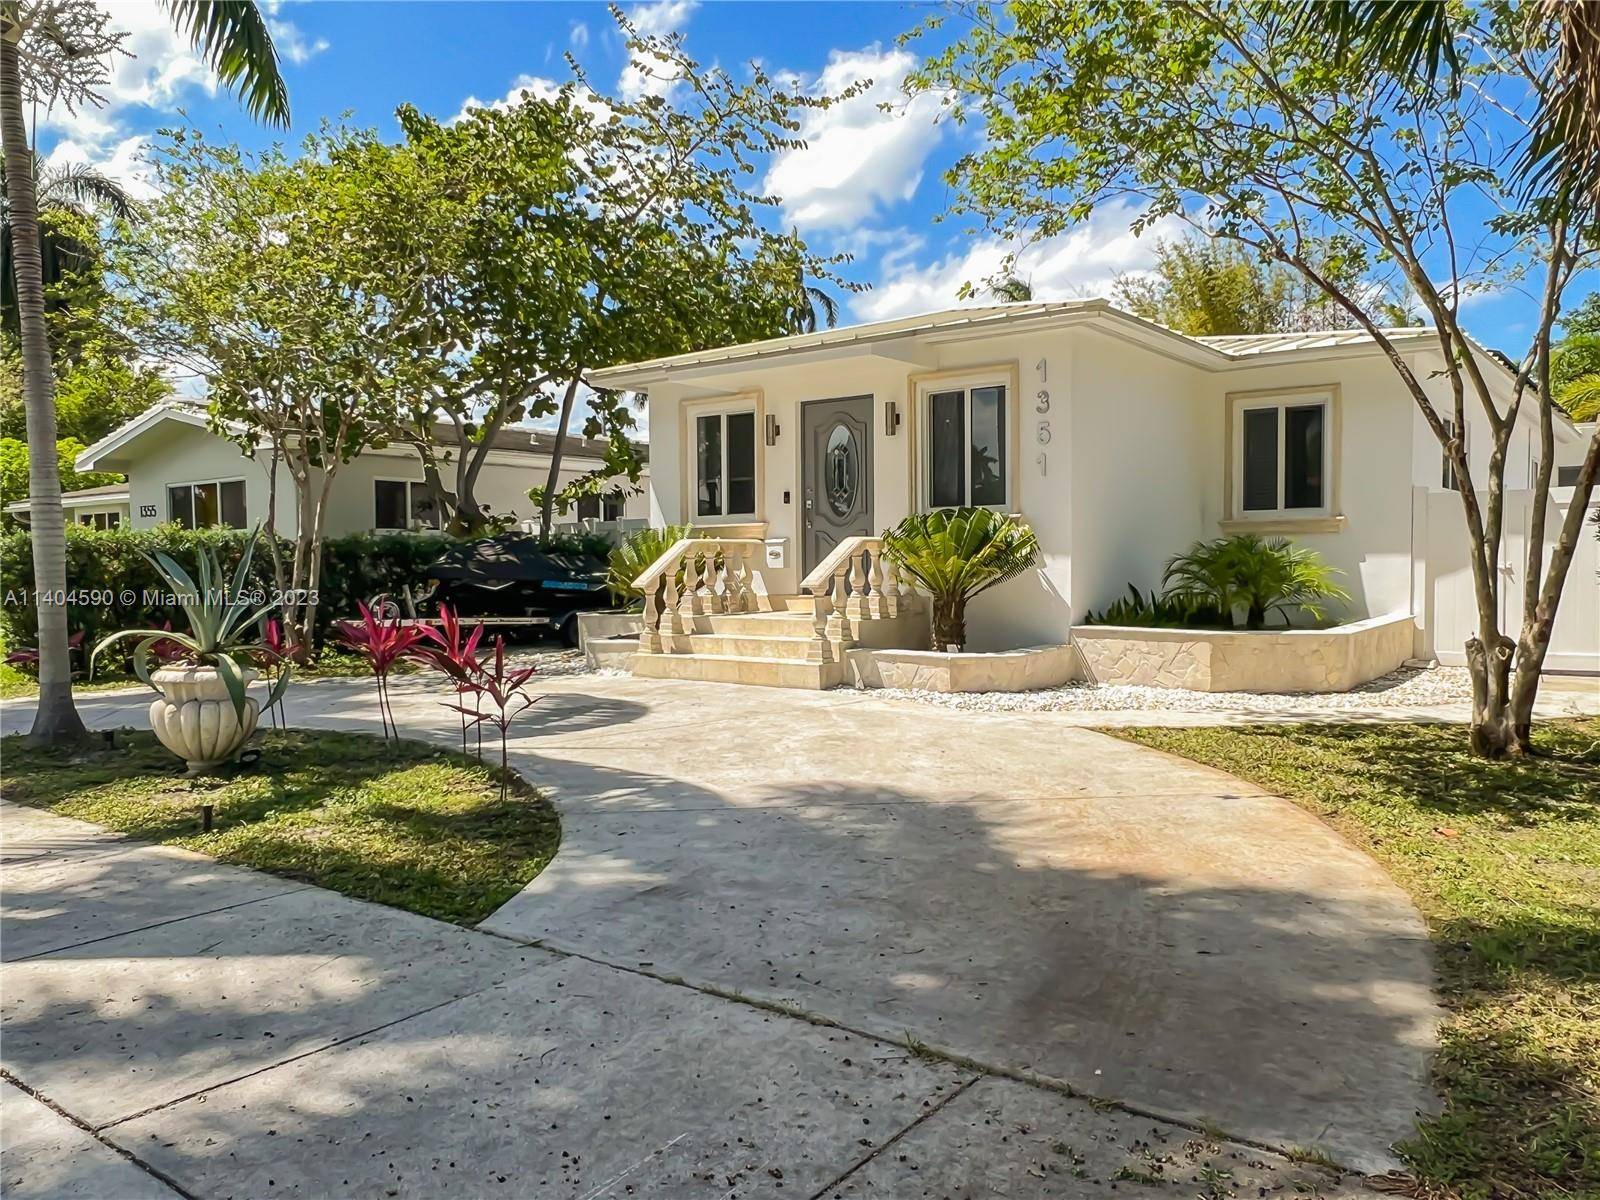 Fully renovated, turn key 2200 square foot single family house located within Hollywood historic district.